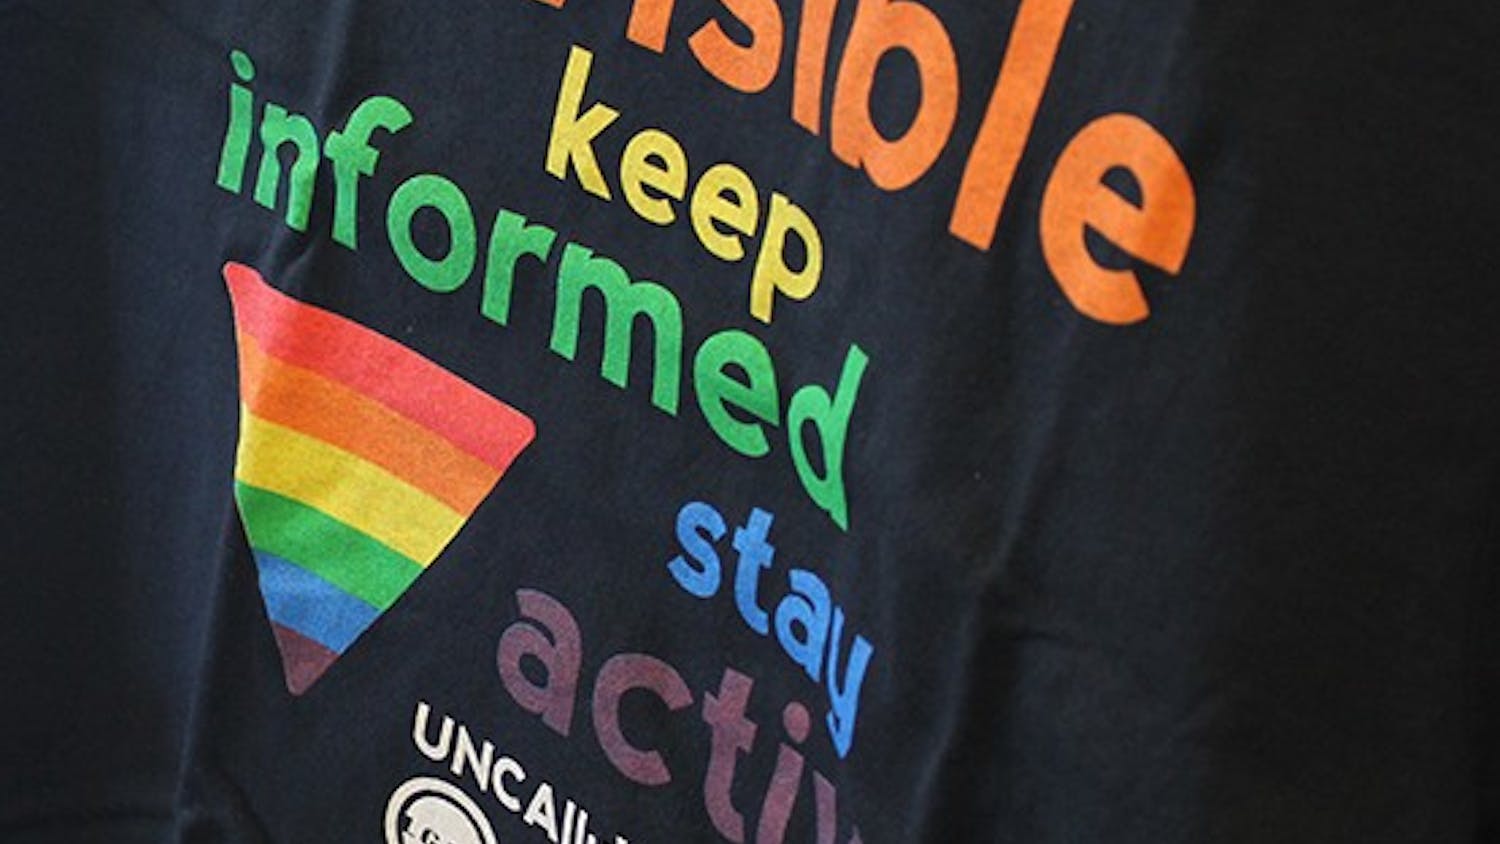 As part of Ally Week, hosted by the Carolina LGBTQ Center, t-shirts were handed out to those willing to show their support and openly wear them this Thursday.